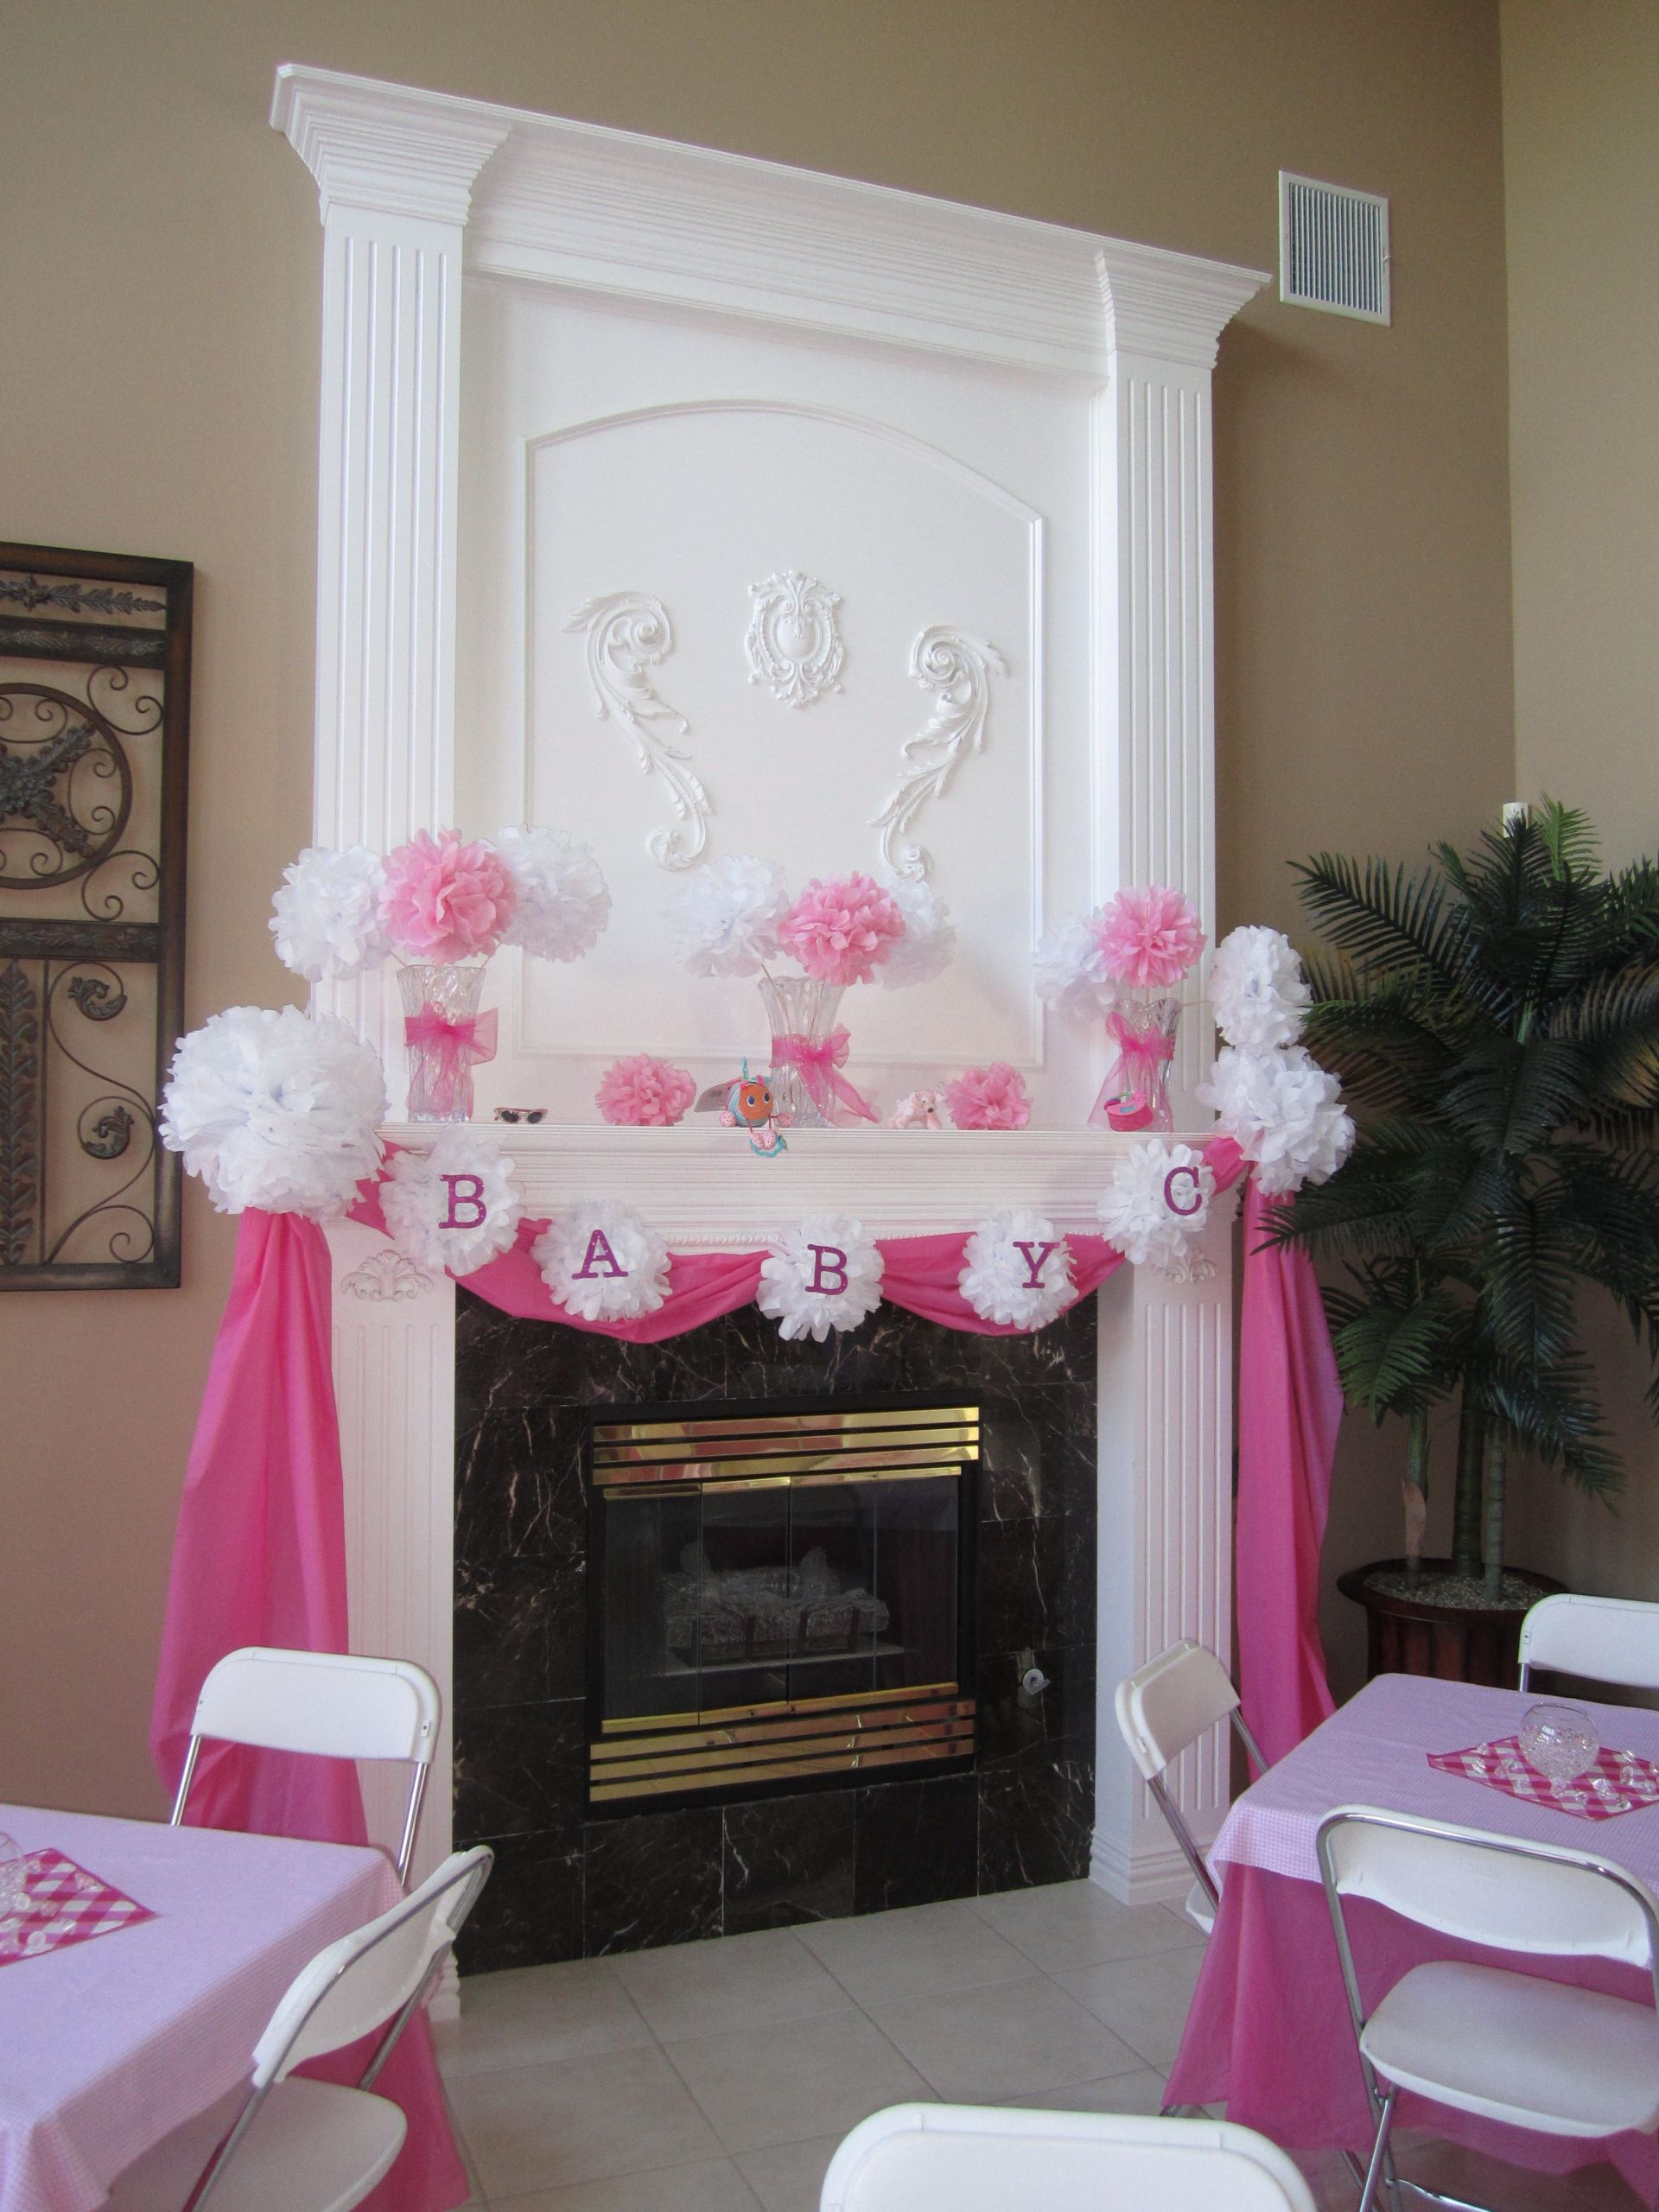 DIY Baby Shower Decoration Ideas For A Girl
 DIY Baby Shower Ideas for Girls